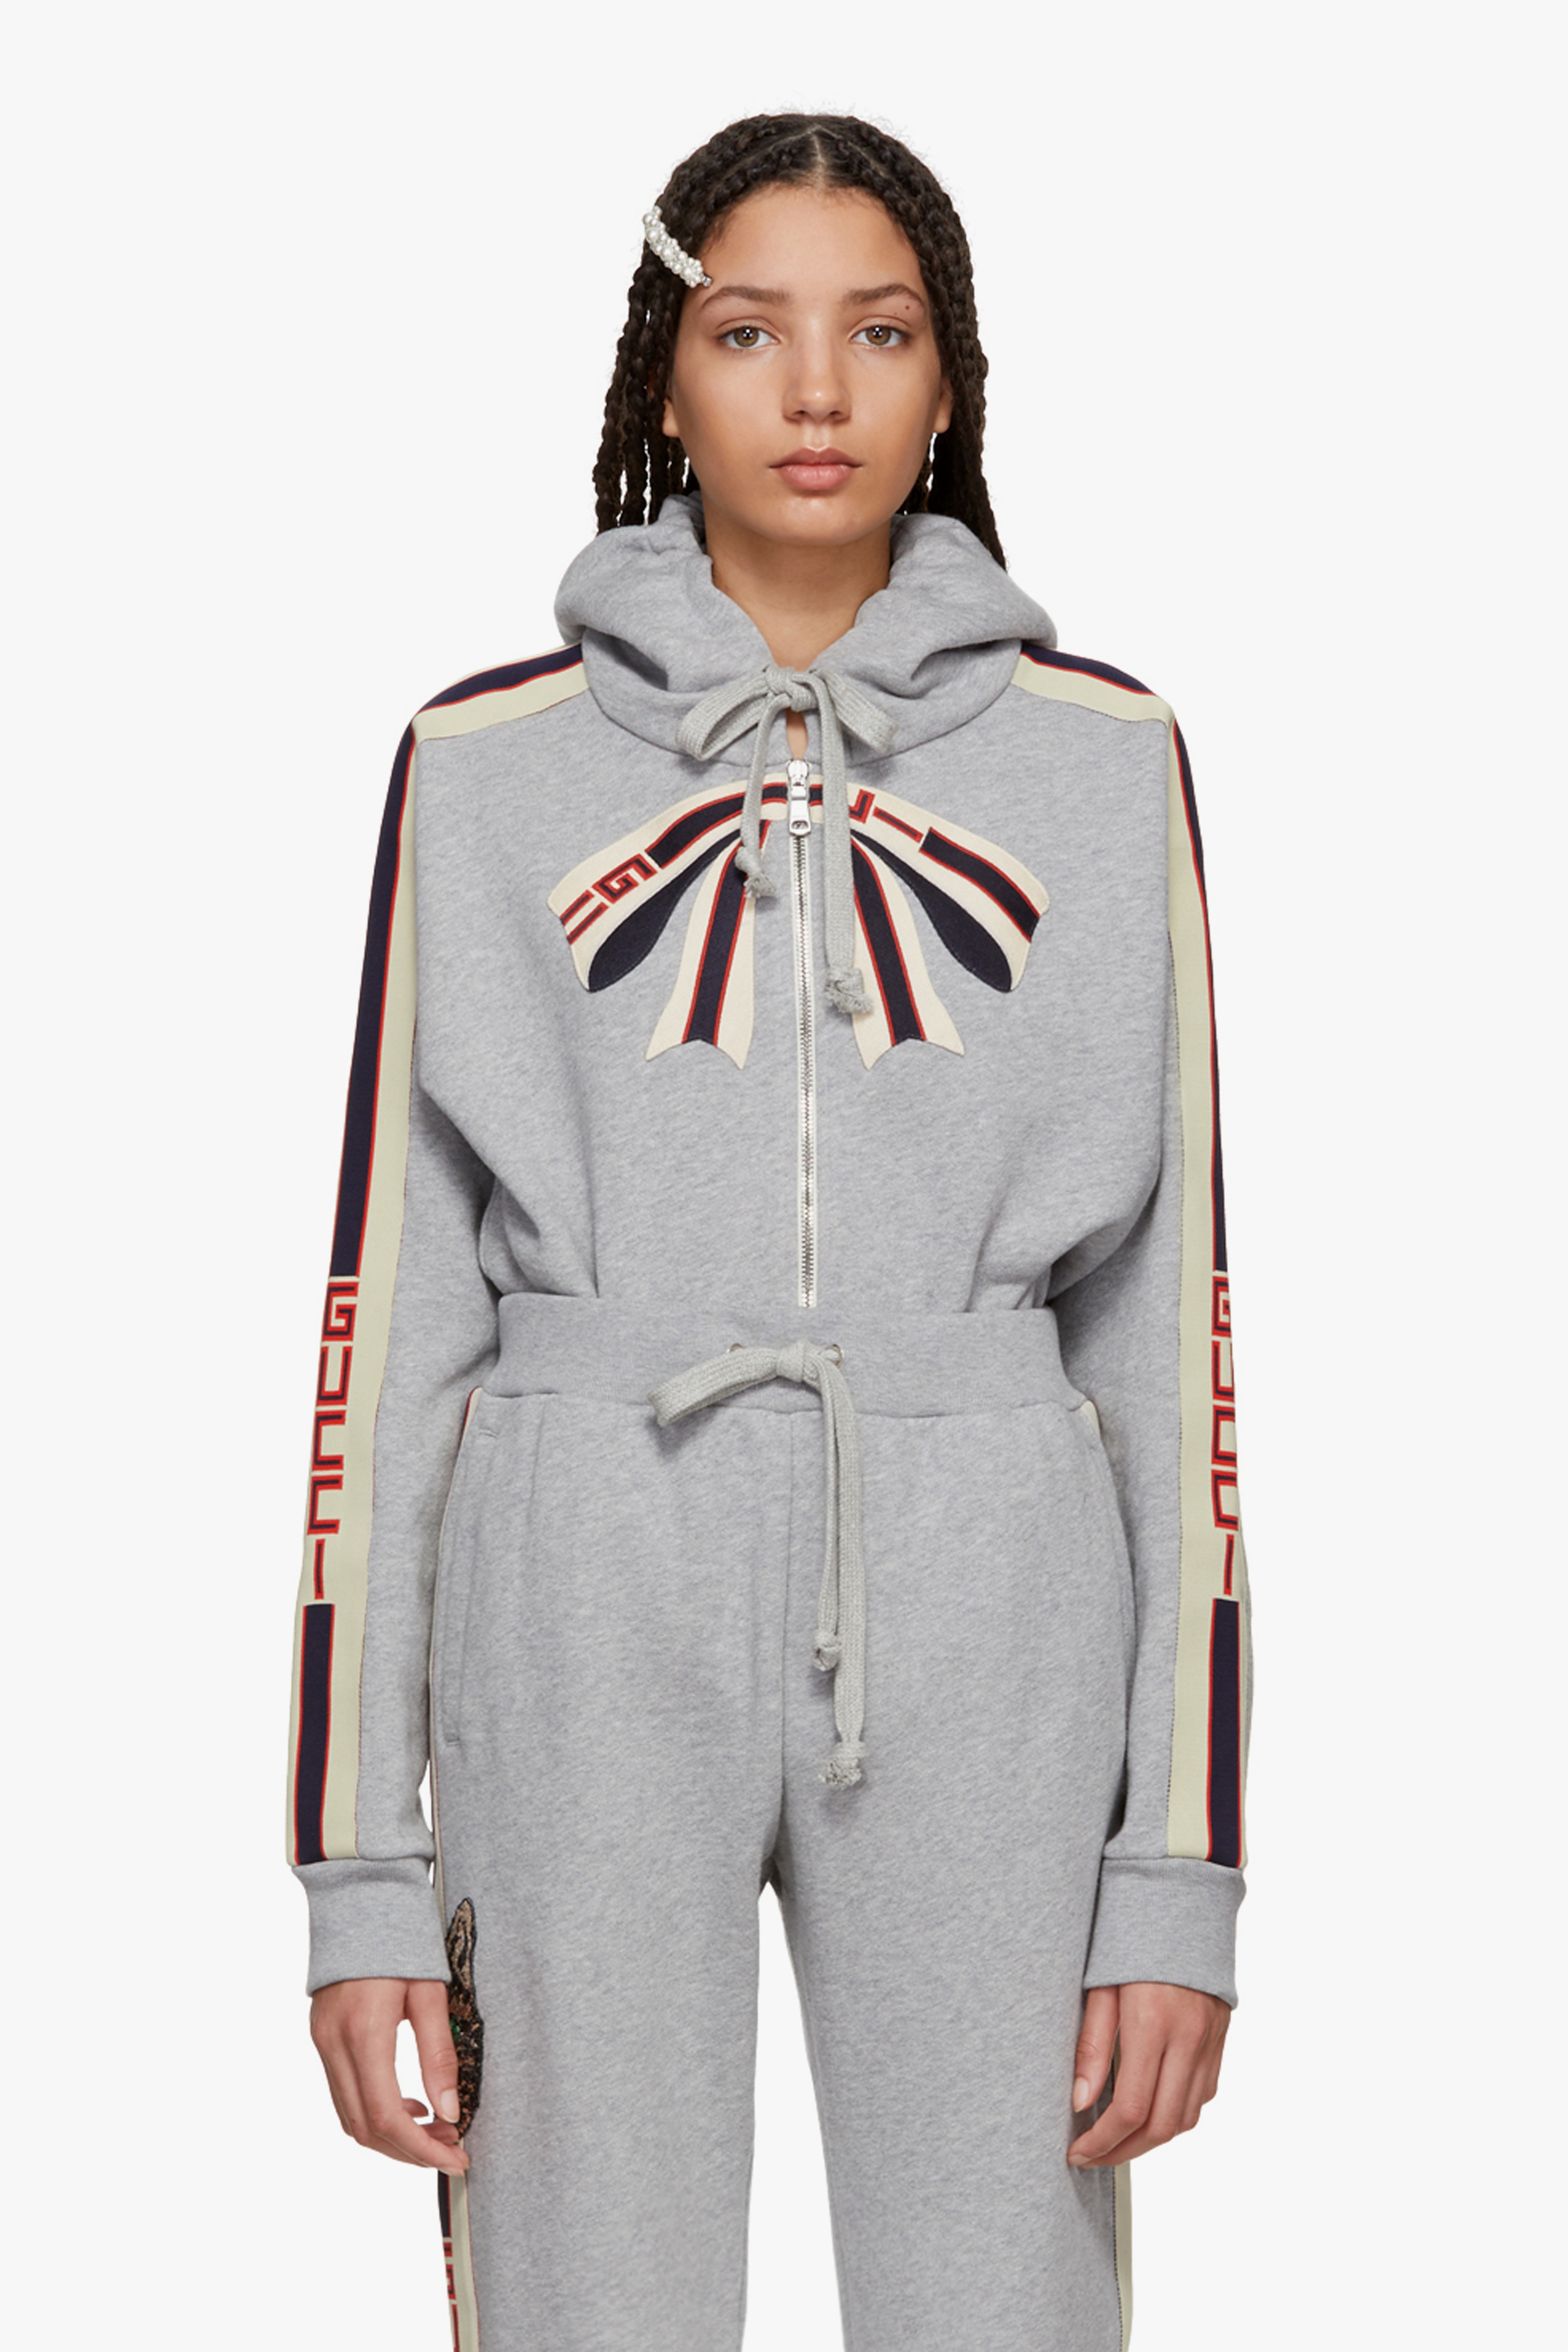 Shop Gucci's New Spring/Summer Arrivals Fashion Clothes Cat Sweater Gucci Tracksuit Monogram